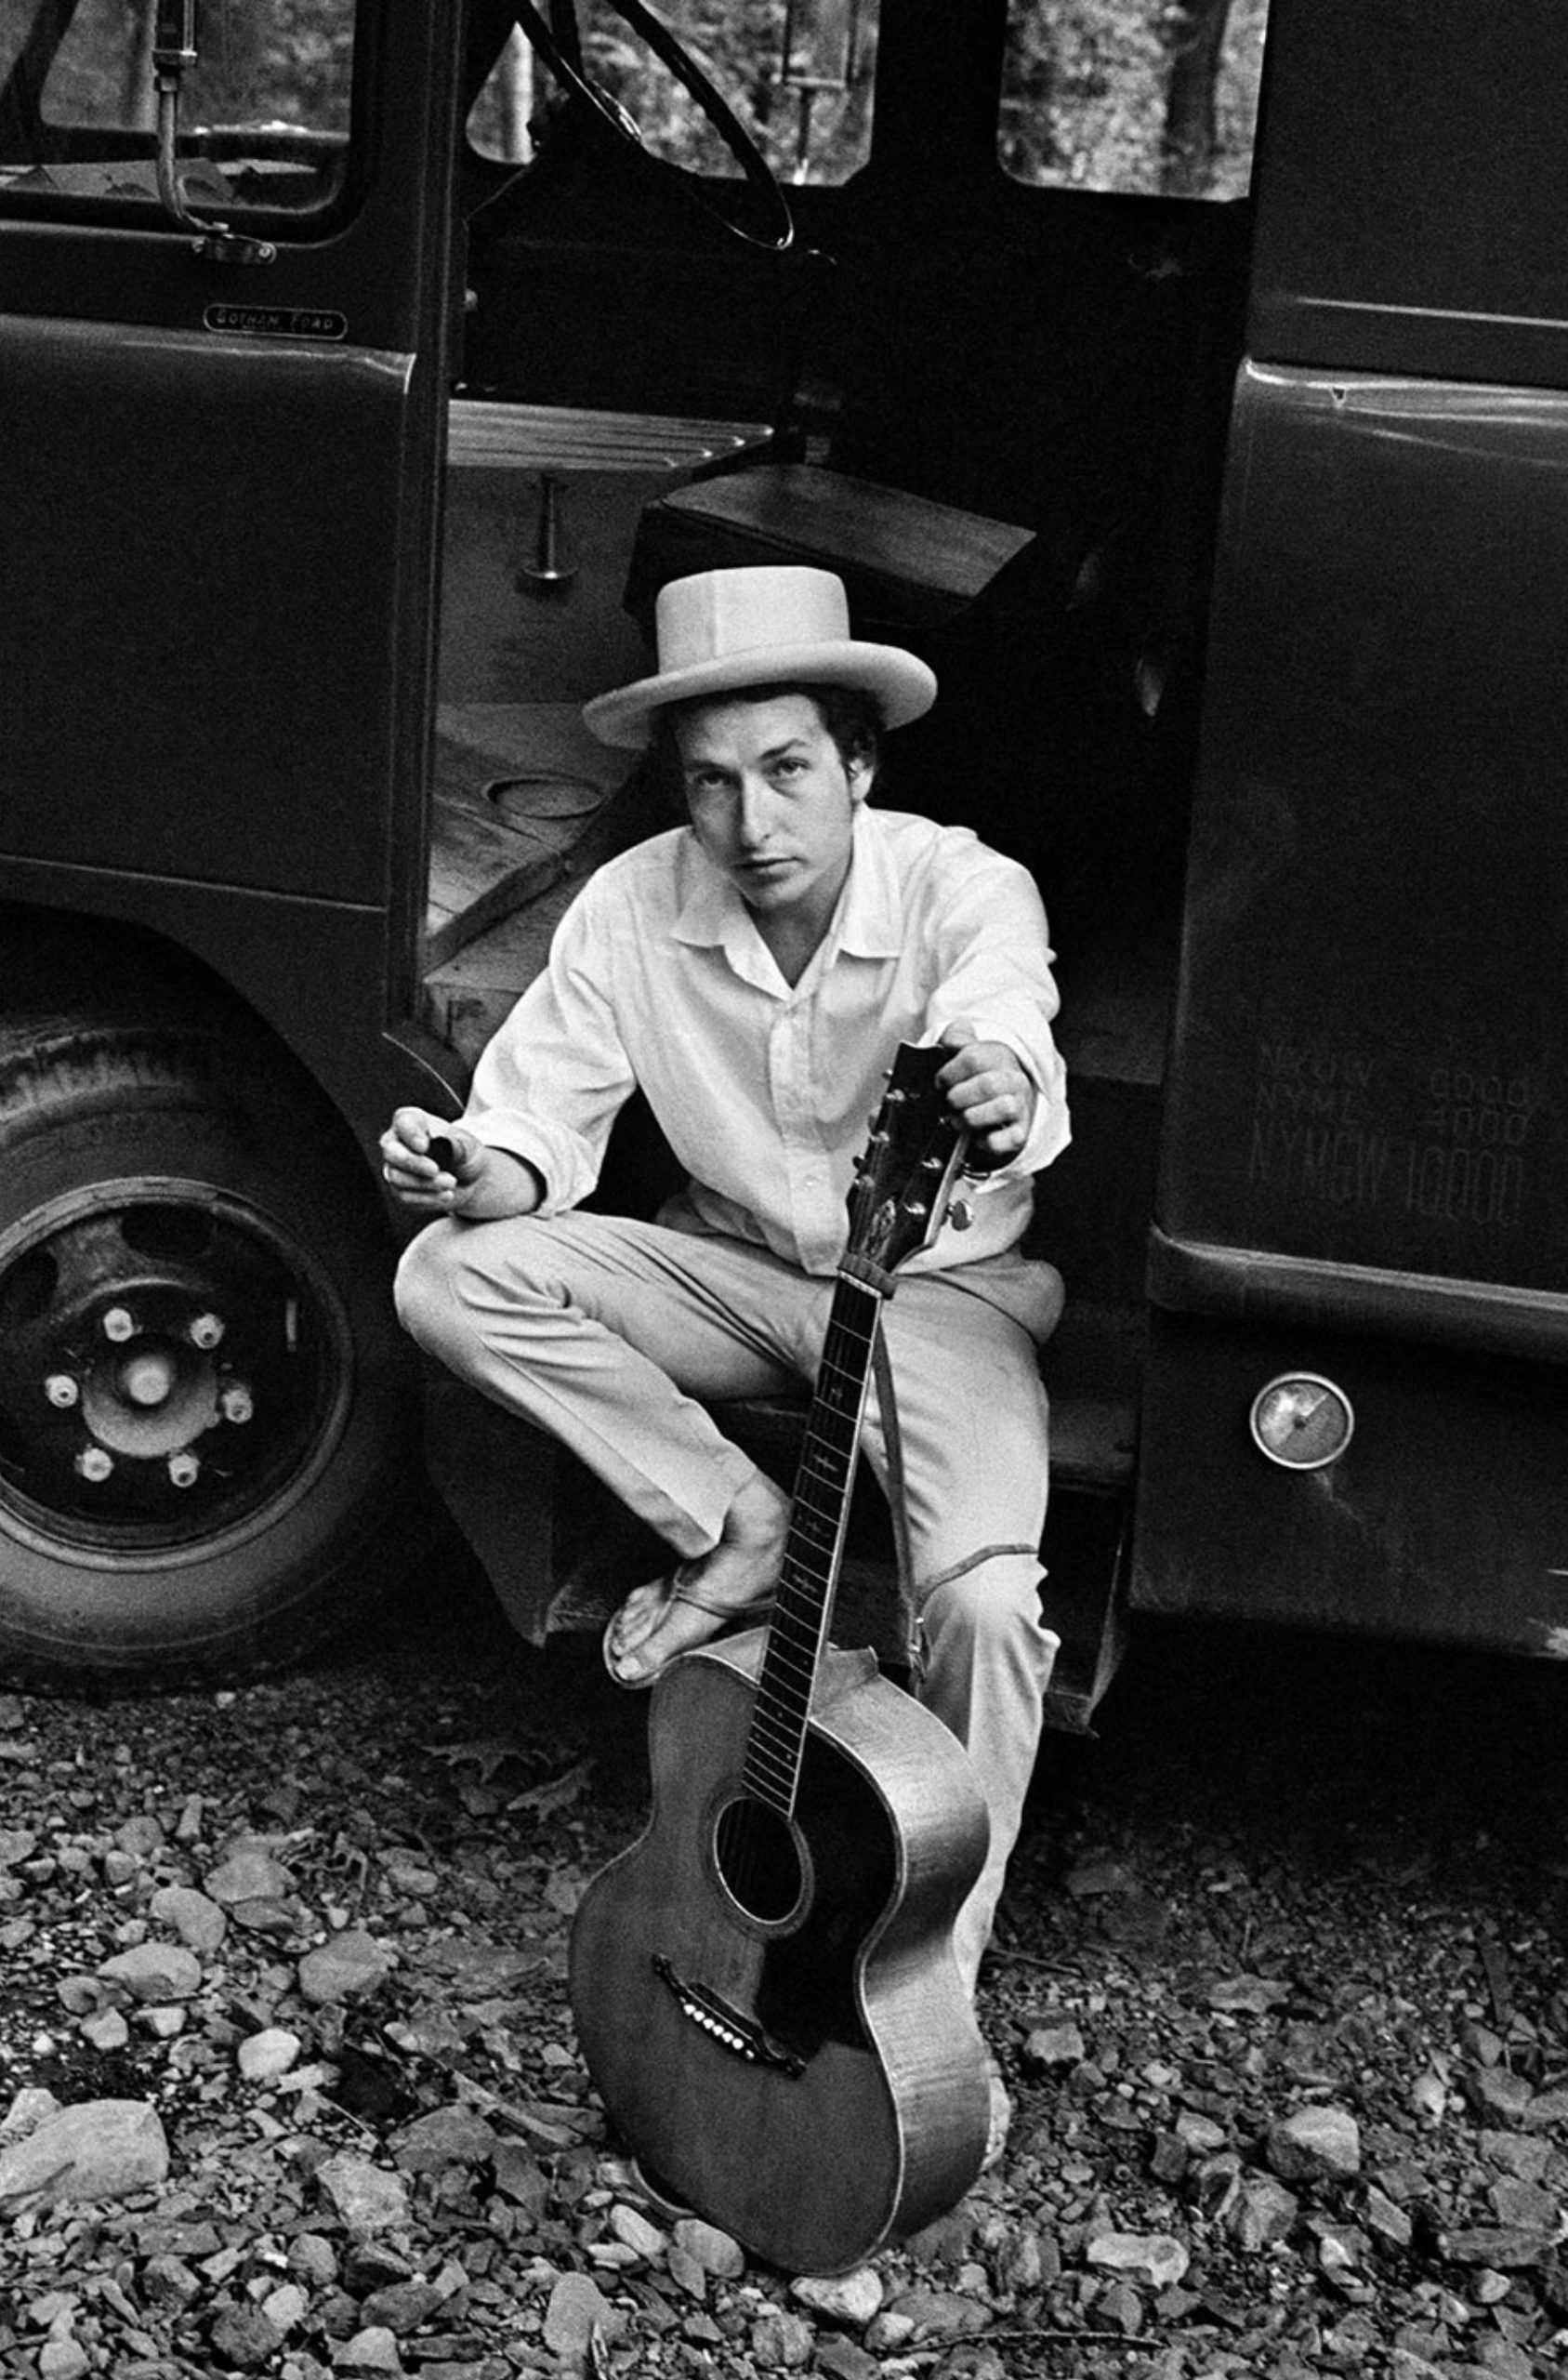 Bob Dylan on his equipment truck outside his Byrdcliffe home. Woodstock, New York. 1968.